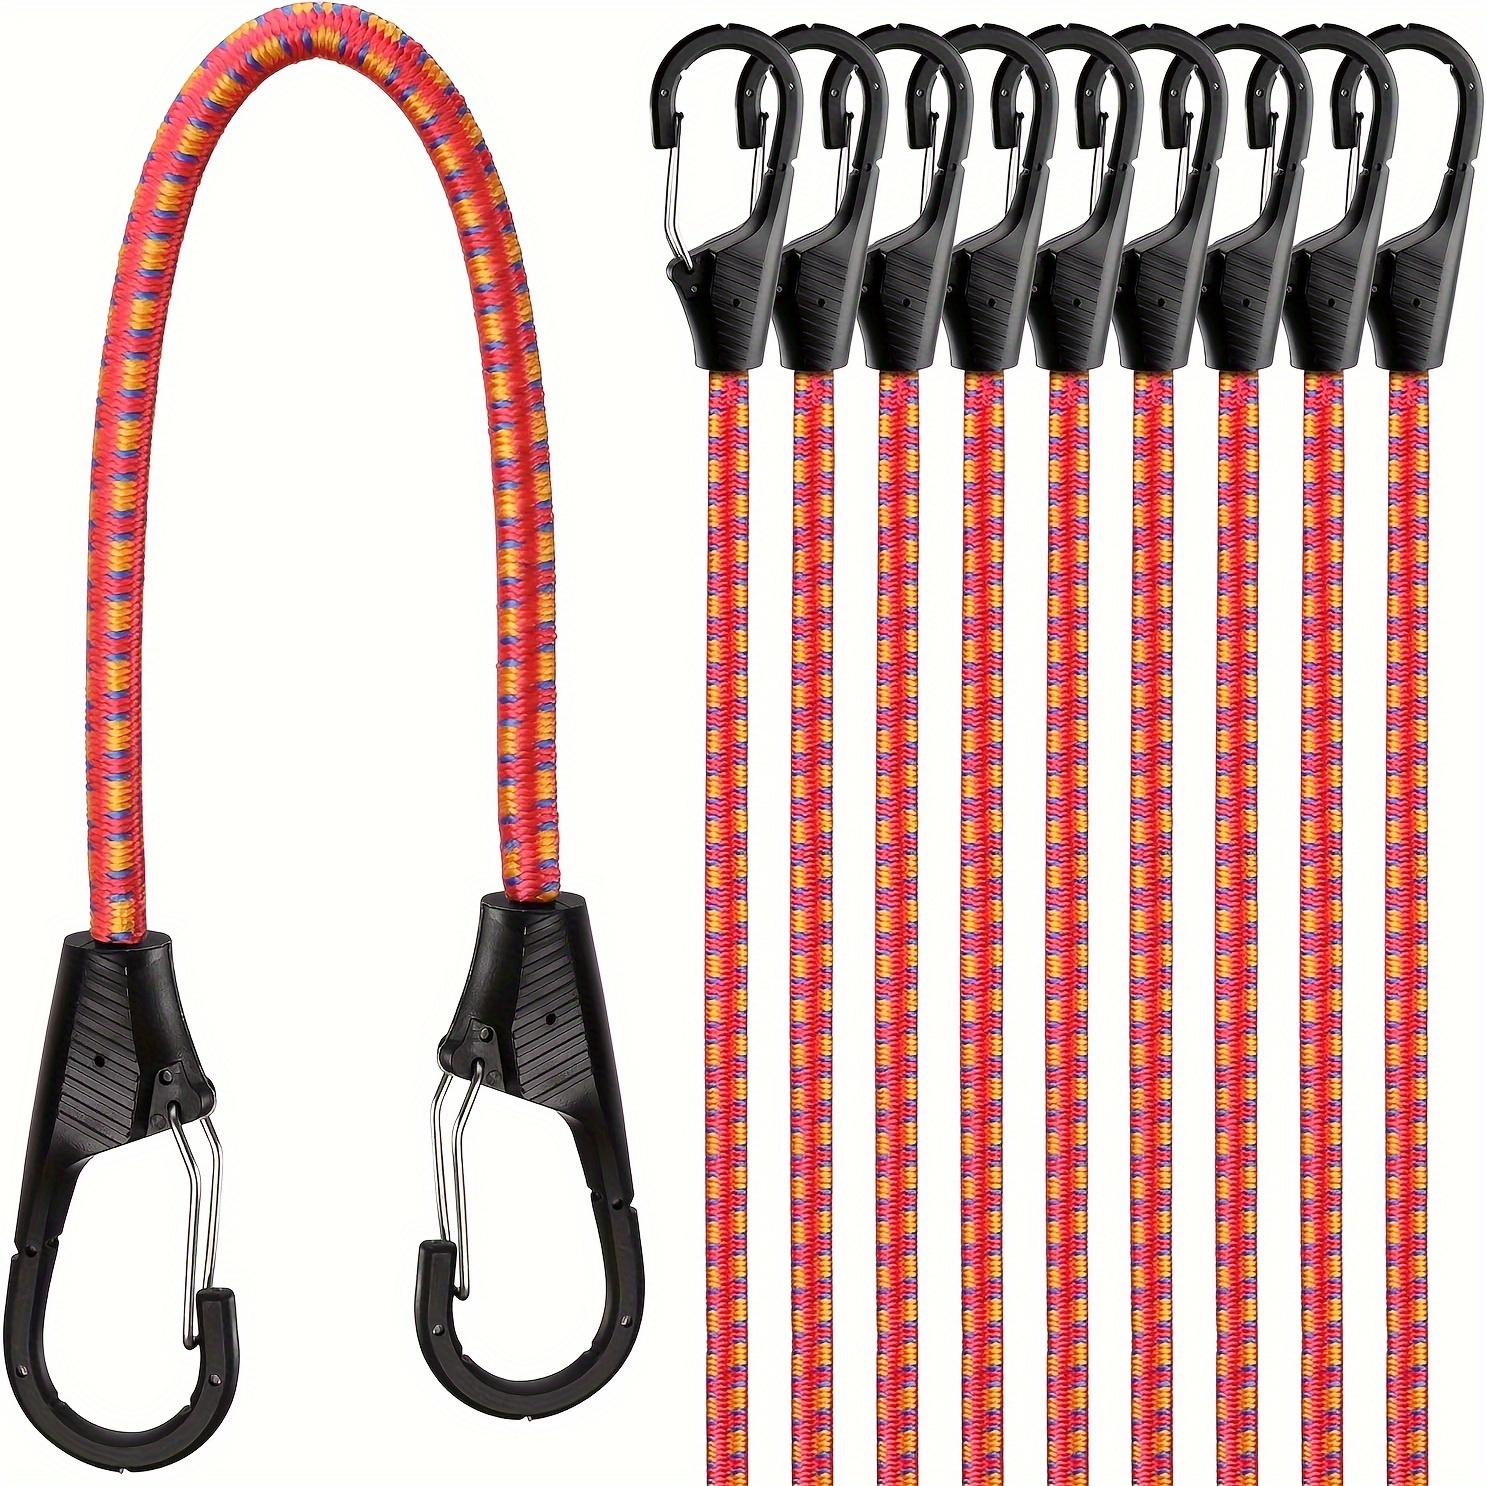 

Horusdy 10-piece Bungee Cords Set, 18-inch Heavy Duty Cords With Spring Lock Clips, Durable Material With Under 122 Pounds Tensile Strength, Secure Hooks For Reliable Fastening